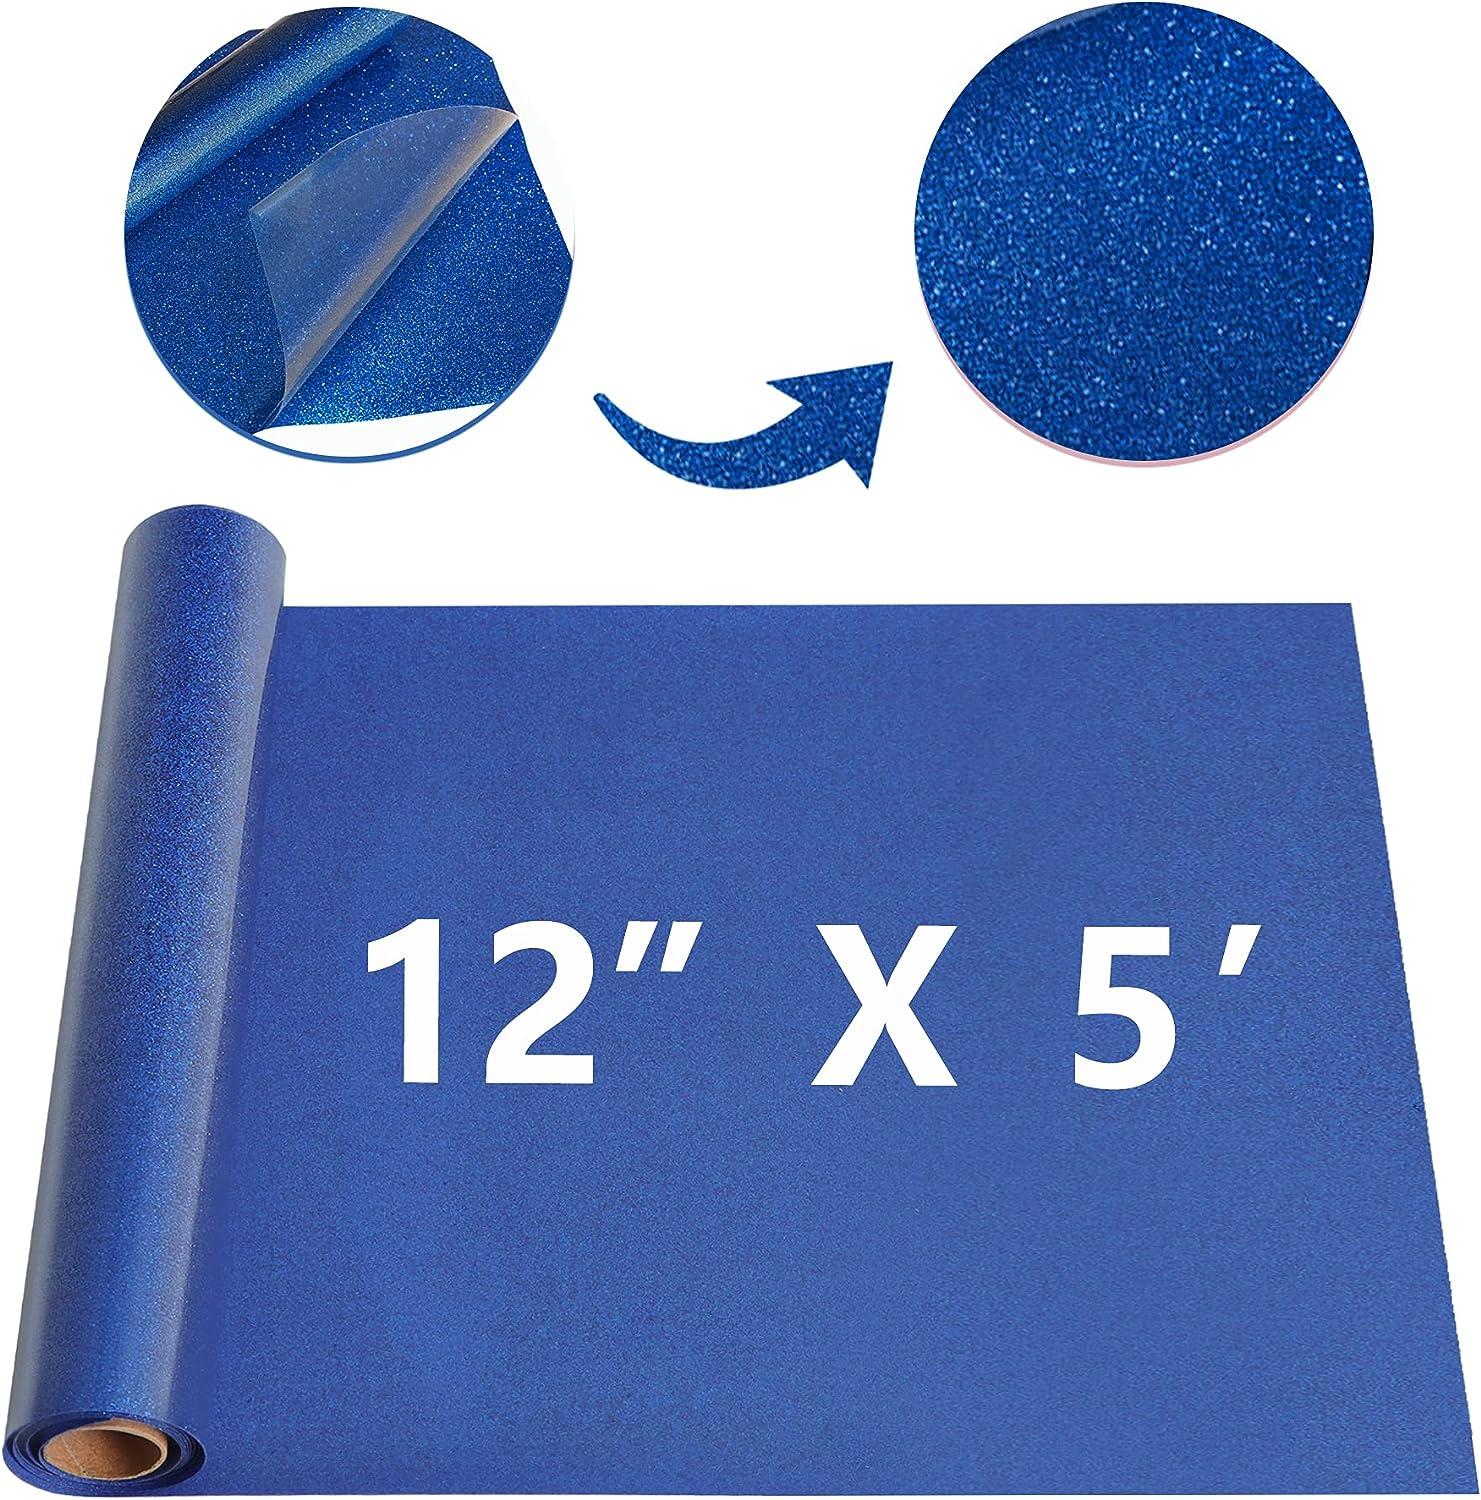 HTVRONT 12 x 5FT Heat Transfer Vinyl RoyaL Blue HTV Rolls for T-Shirts,  Clothing and Textiles, Easy Transfers